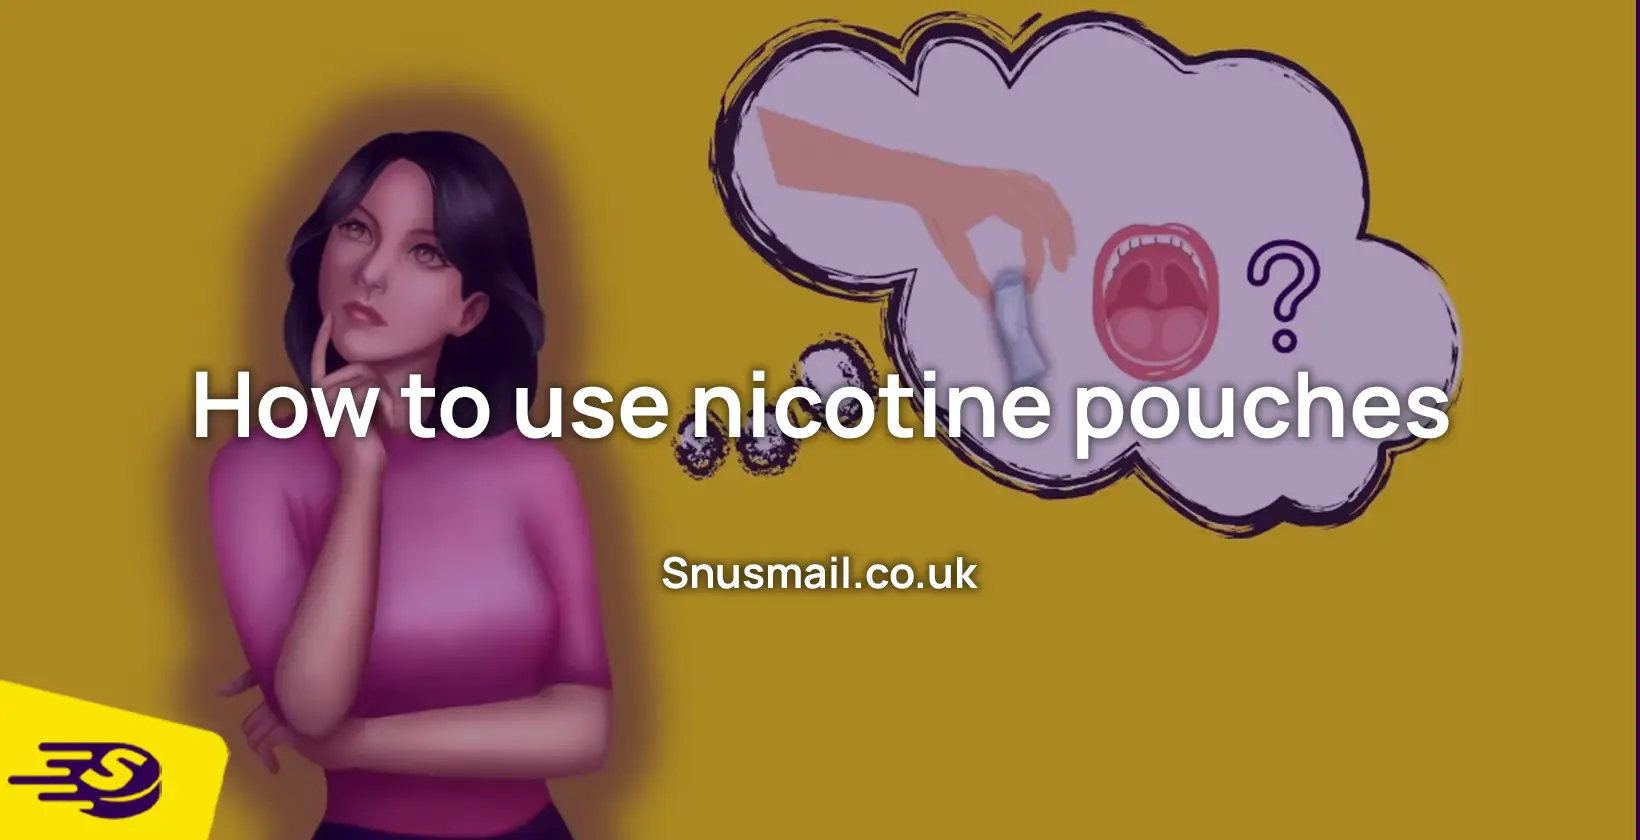 How to use nicotine pouches correctly